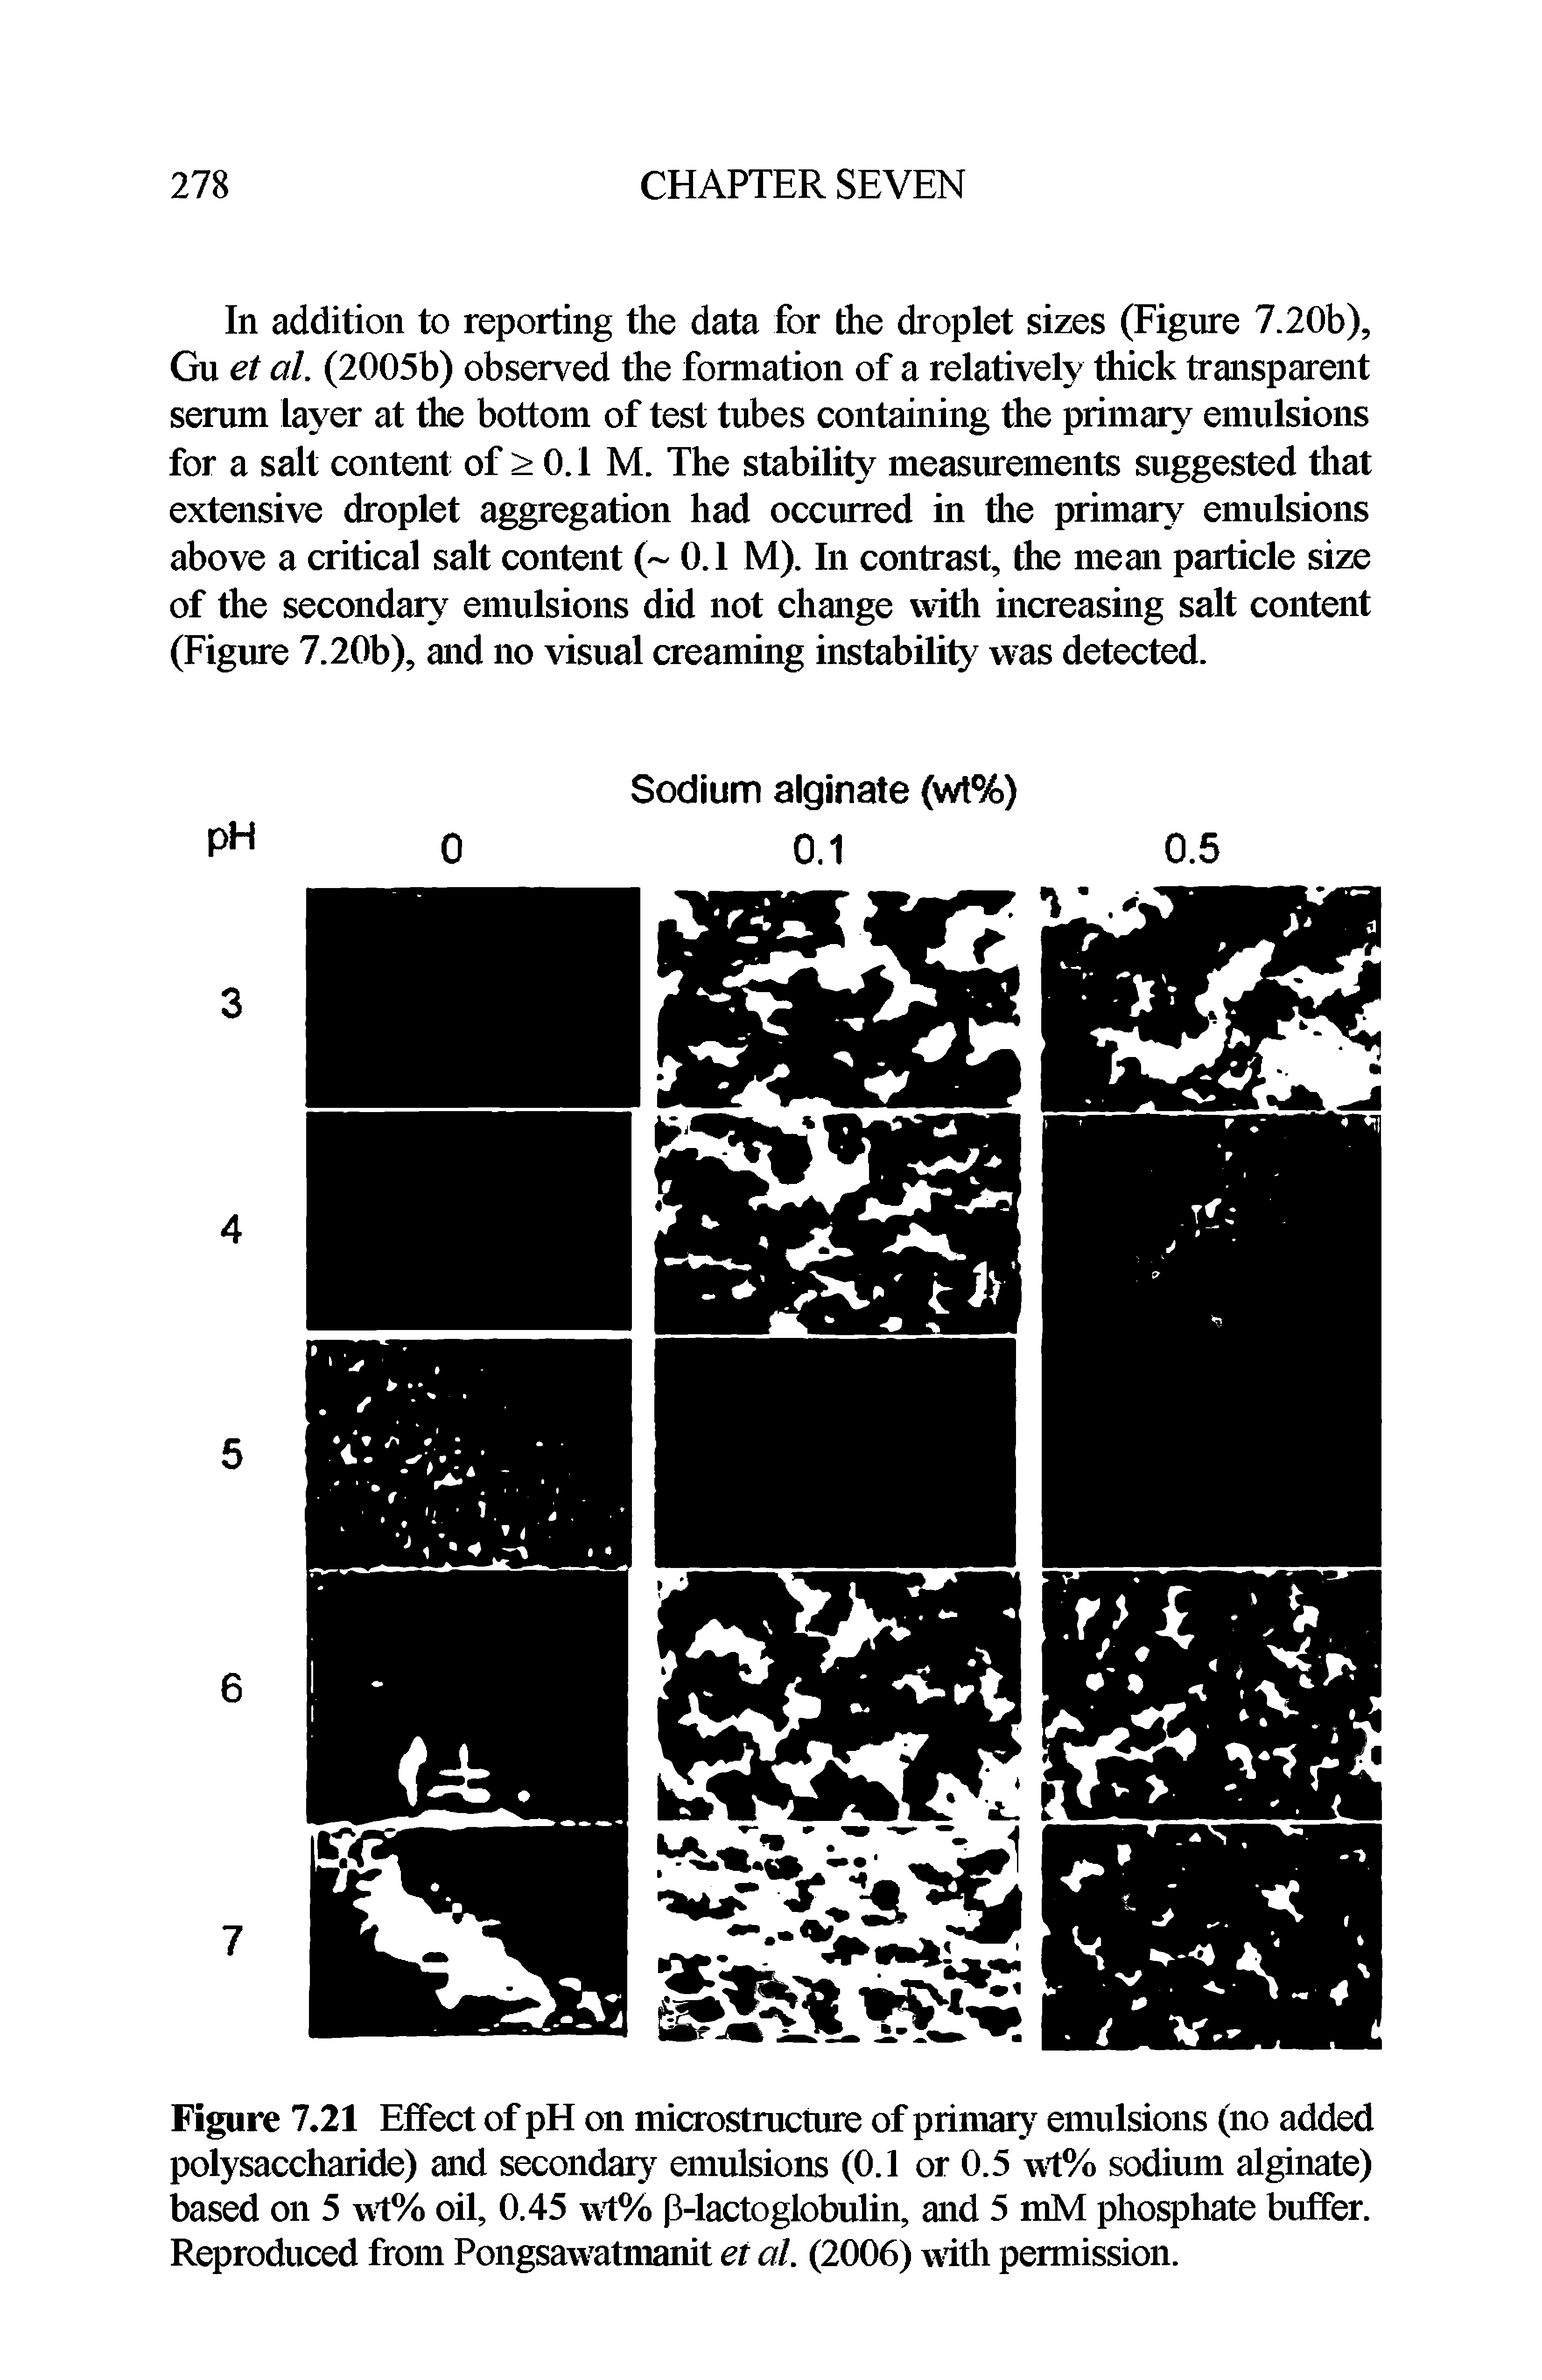 Figure 7.21 Effect of pH on microstructure of primary emulsions (no added polysaccharide) and secondaiy emulsions (0.1 or 0.5 wt% sodium alginate) based on 5 wt% oil, 0.45 vt% p-lactoglobulin, and 5 mM phosphate buffer. Reproduced from Pongsawatmanit et al. (2006) with permission.